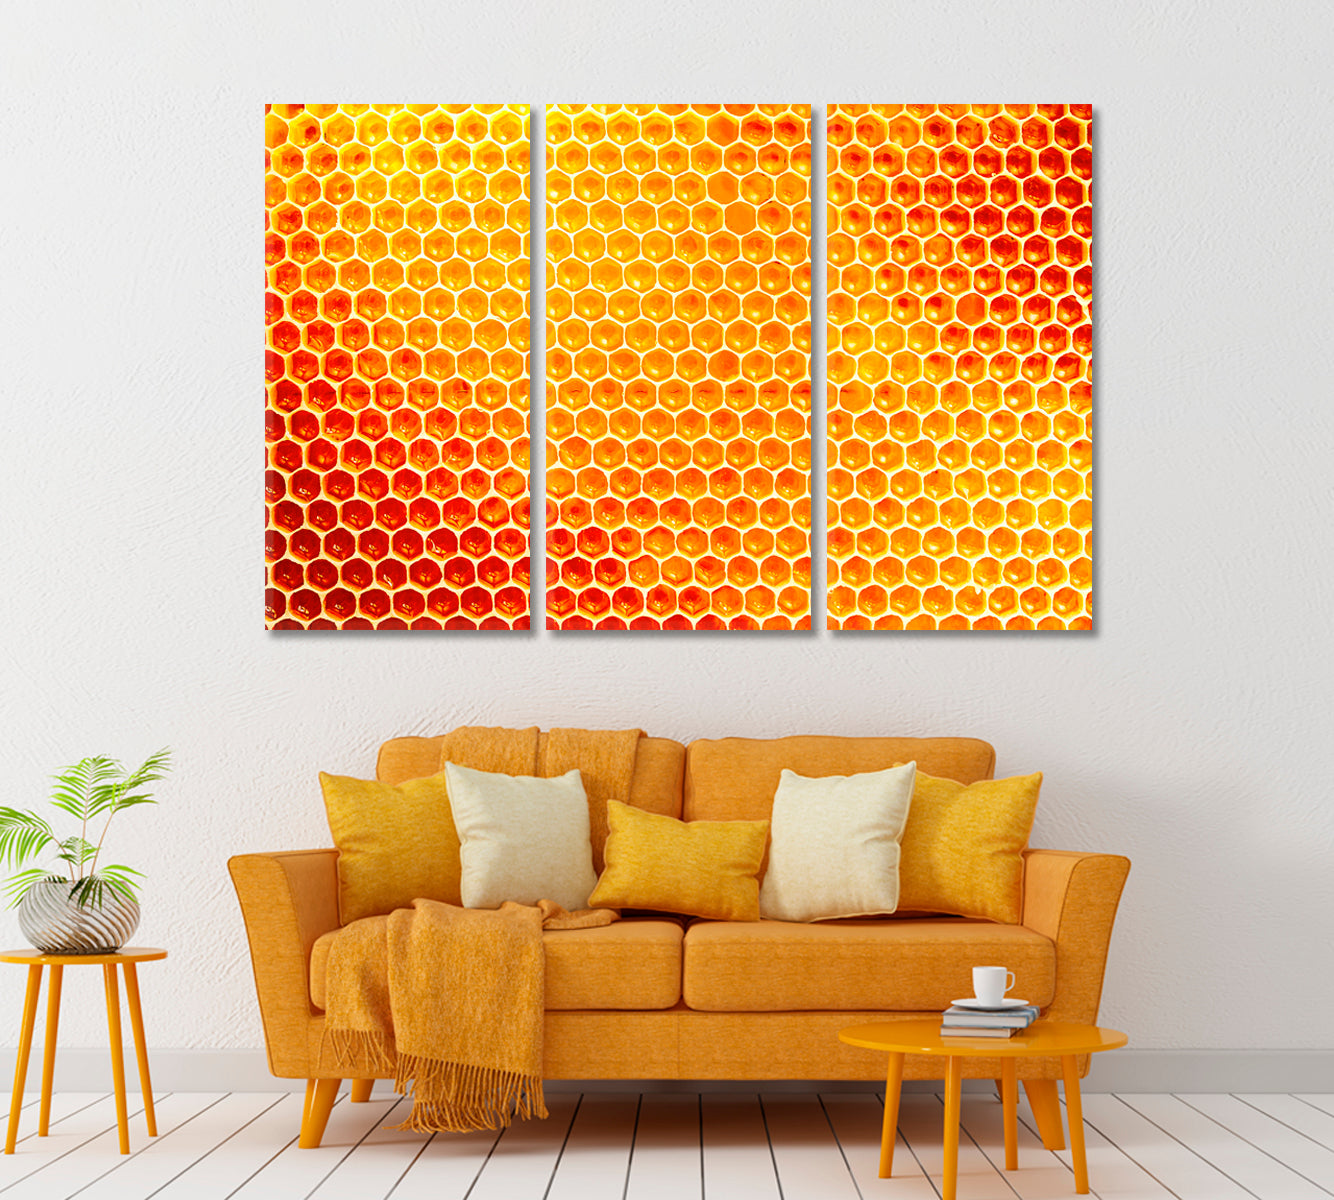 Honeycomb from Beehive Canvas Print ArtLexy   